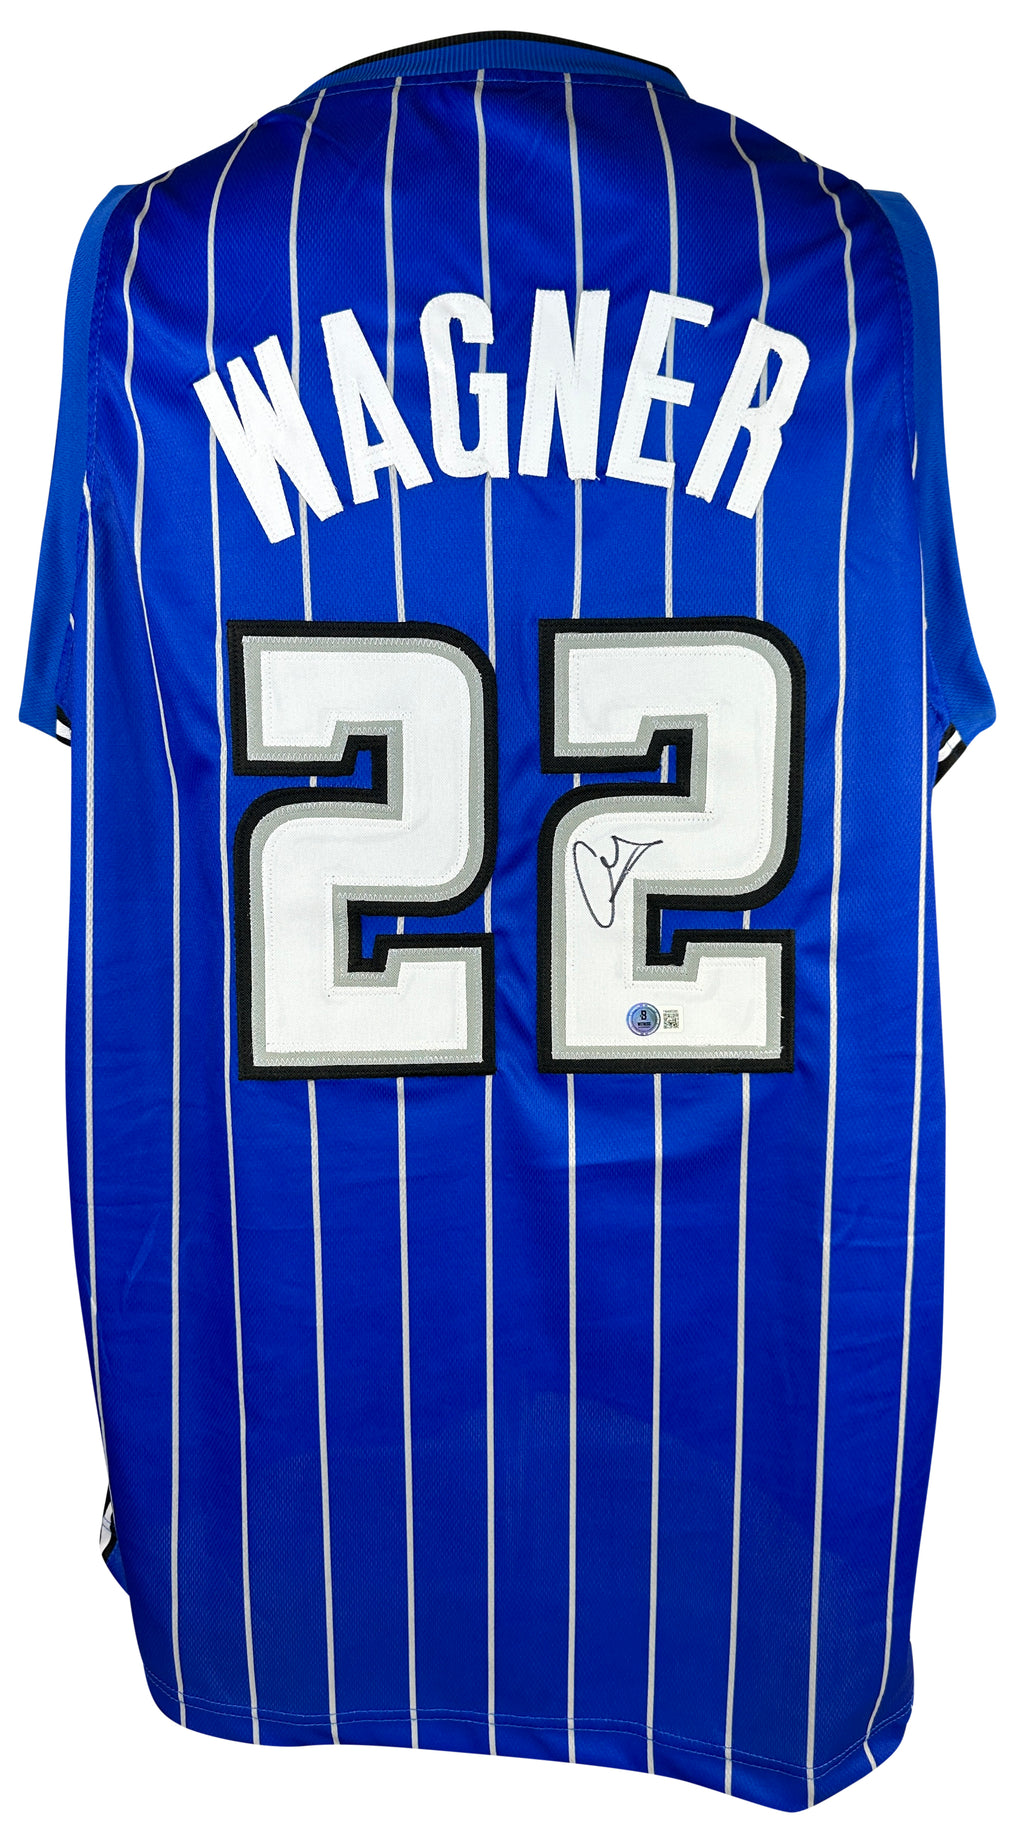 Franz Wagner autographed signed jersey NBA Orlando Magic BAS